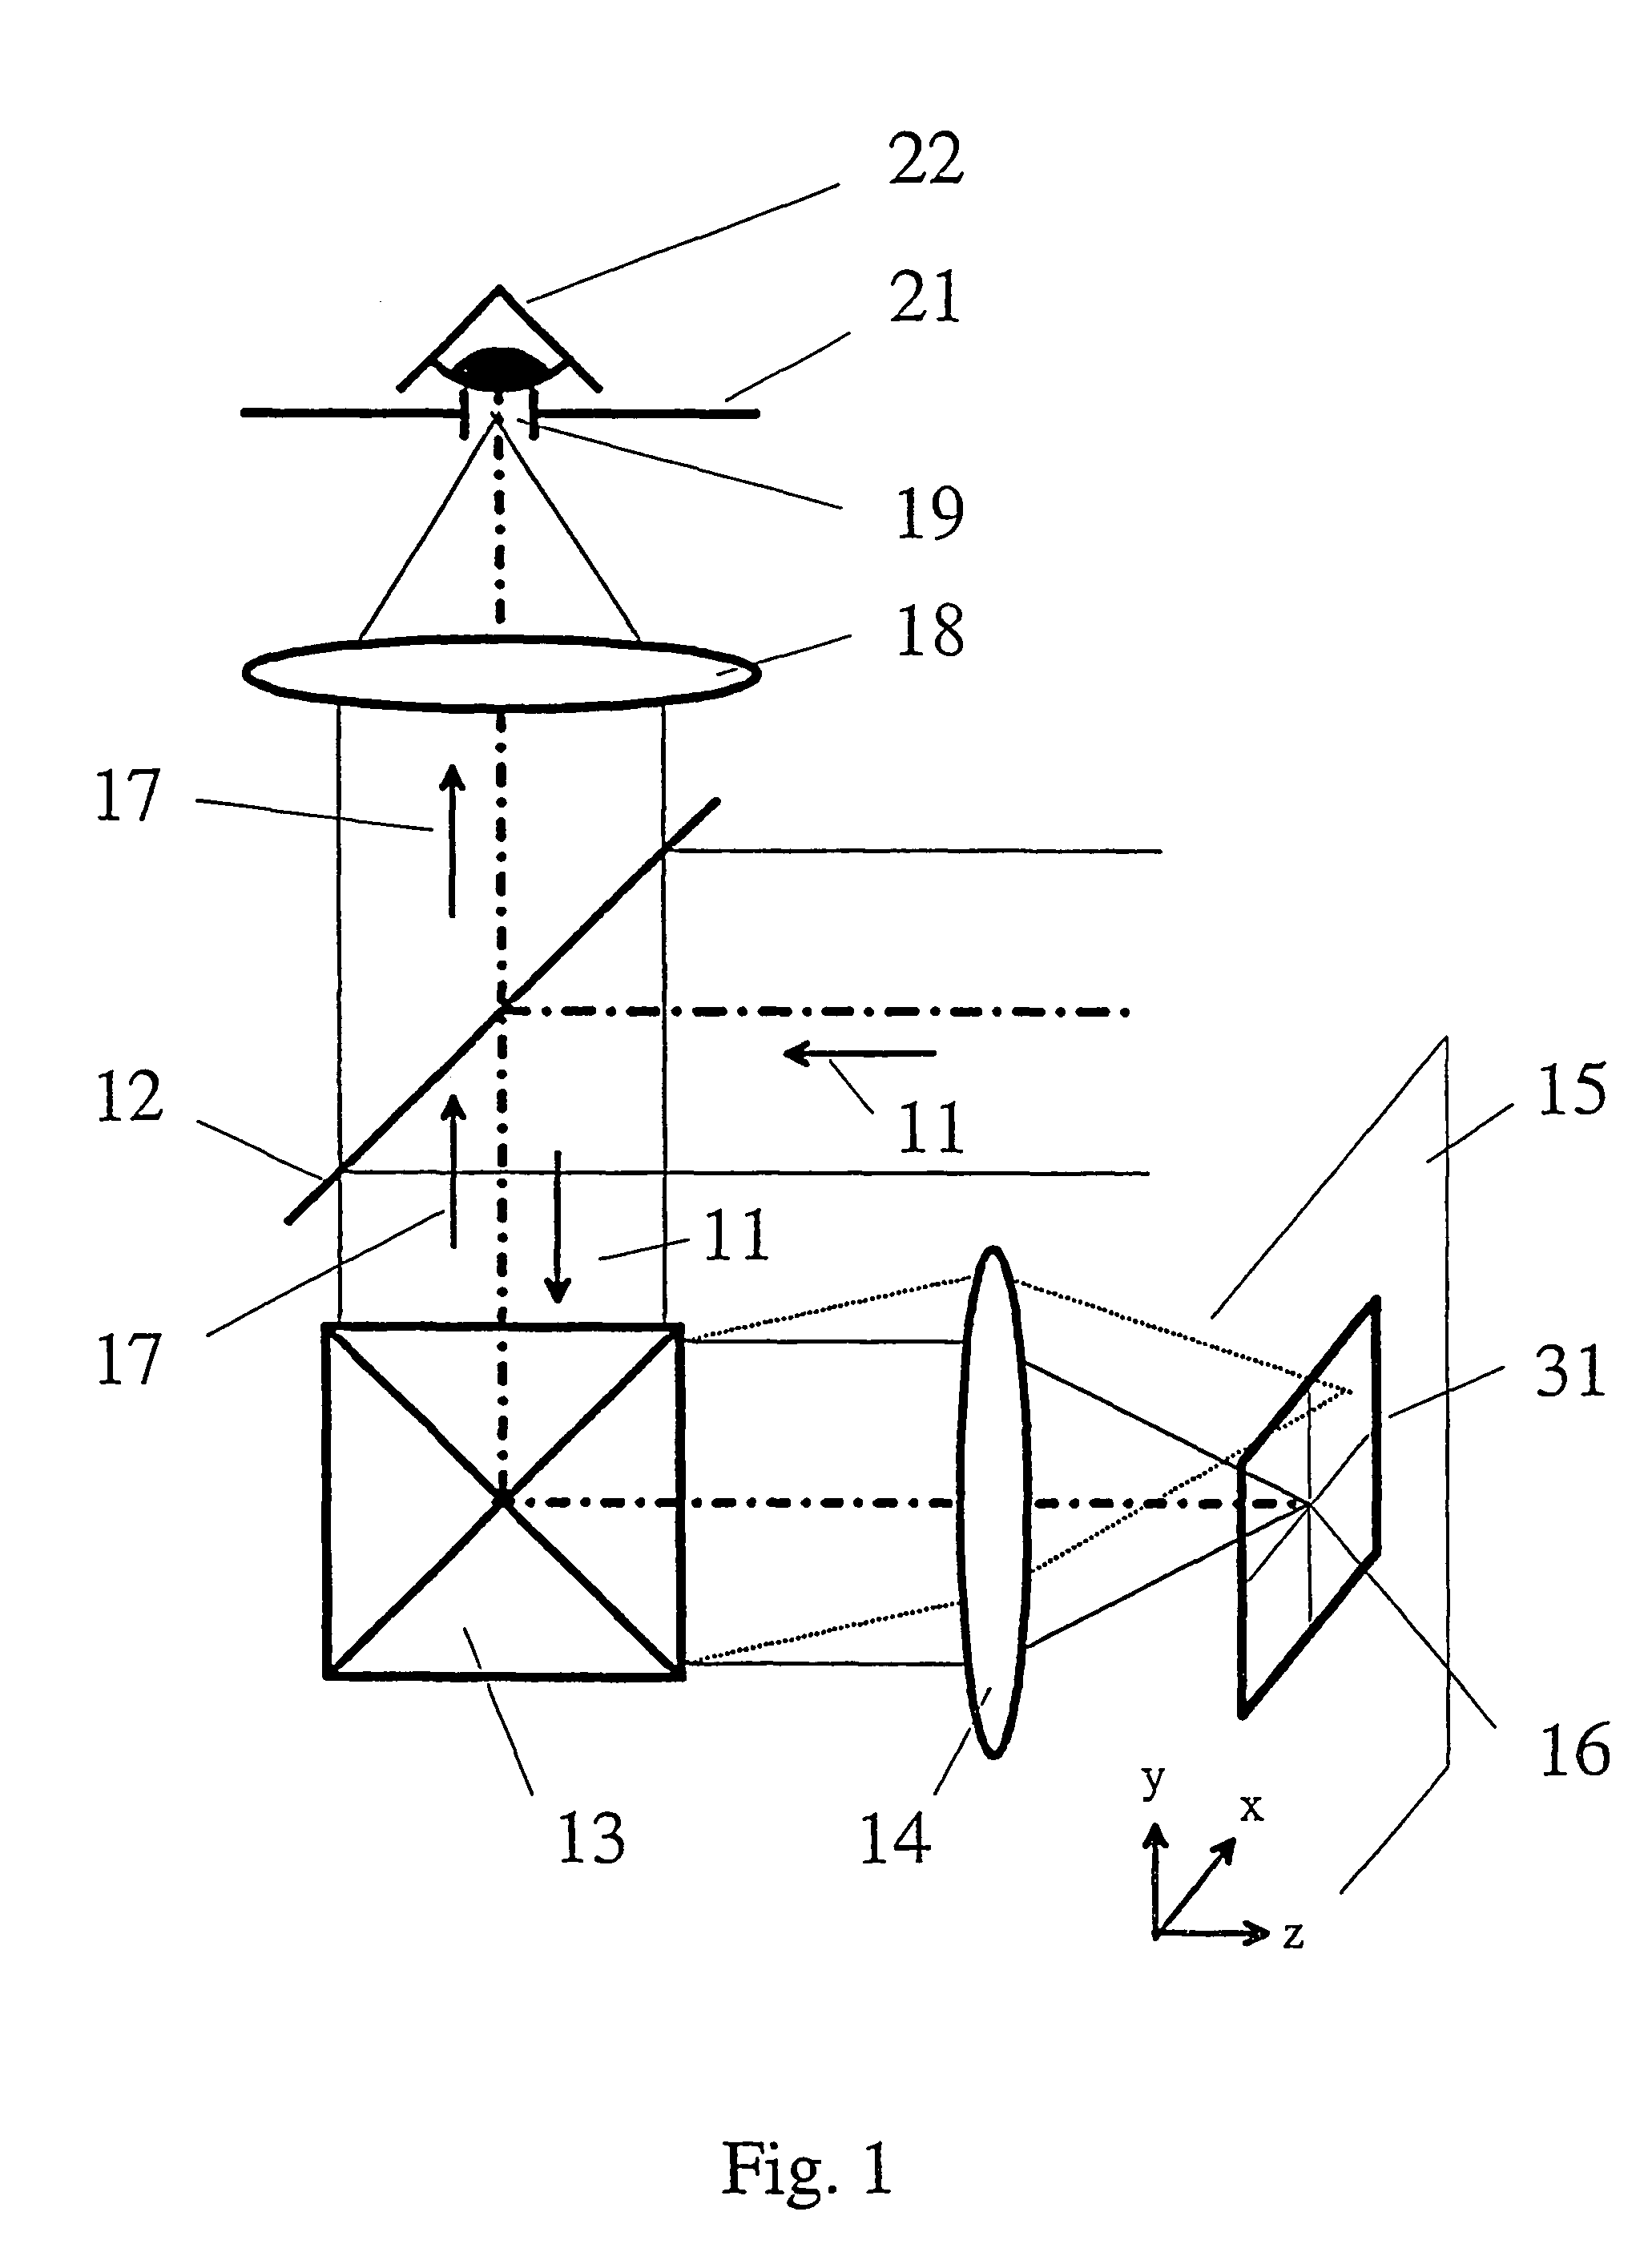 Reference device for evaluating the performance of a confocal laser scanning microscope, and a method and system for performing that evaluation